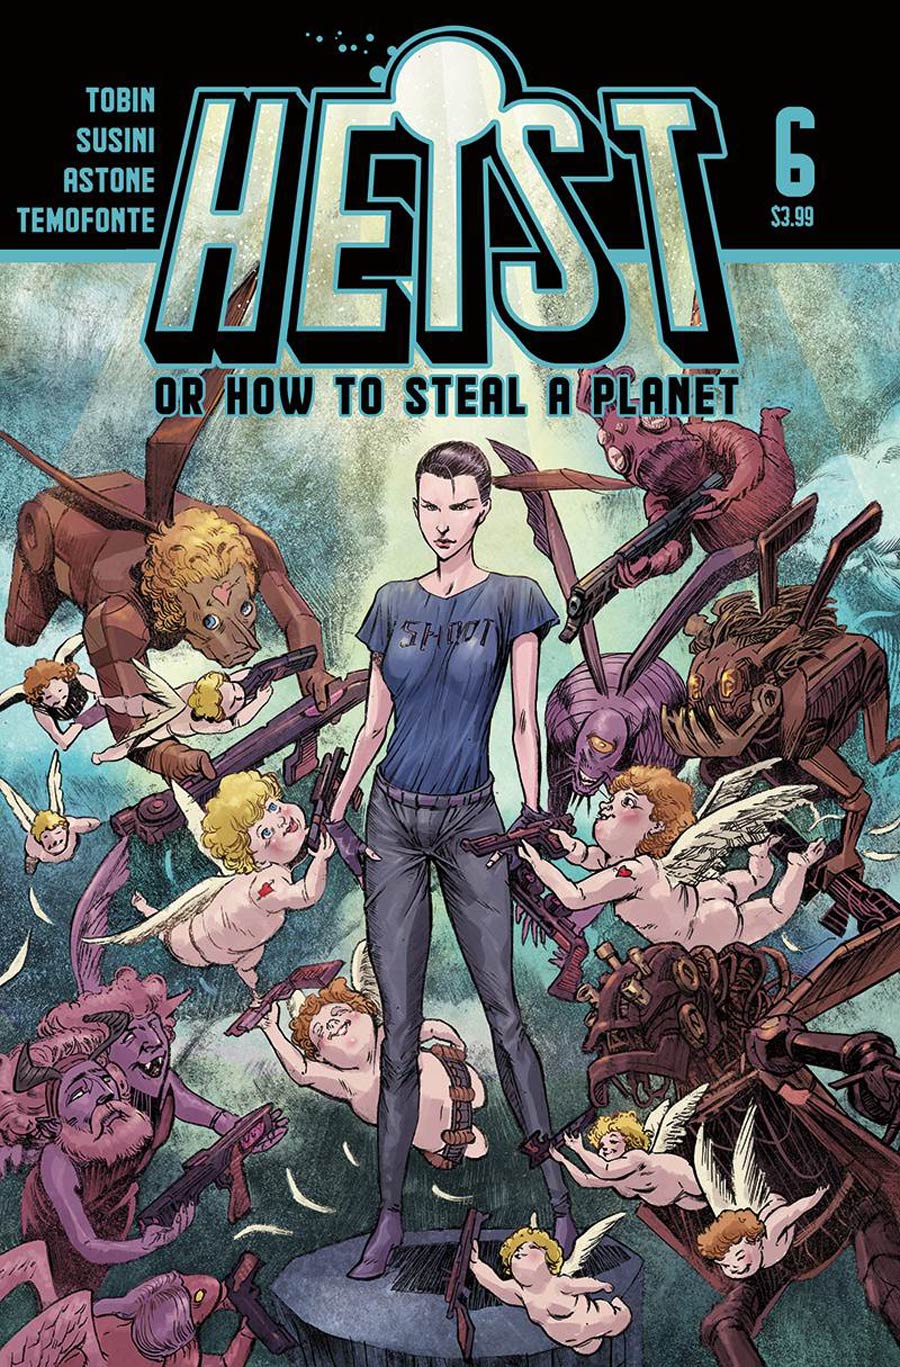 Heist Or How To Steal A Planet #6